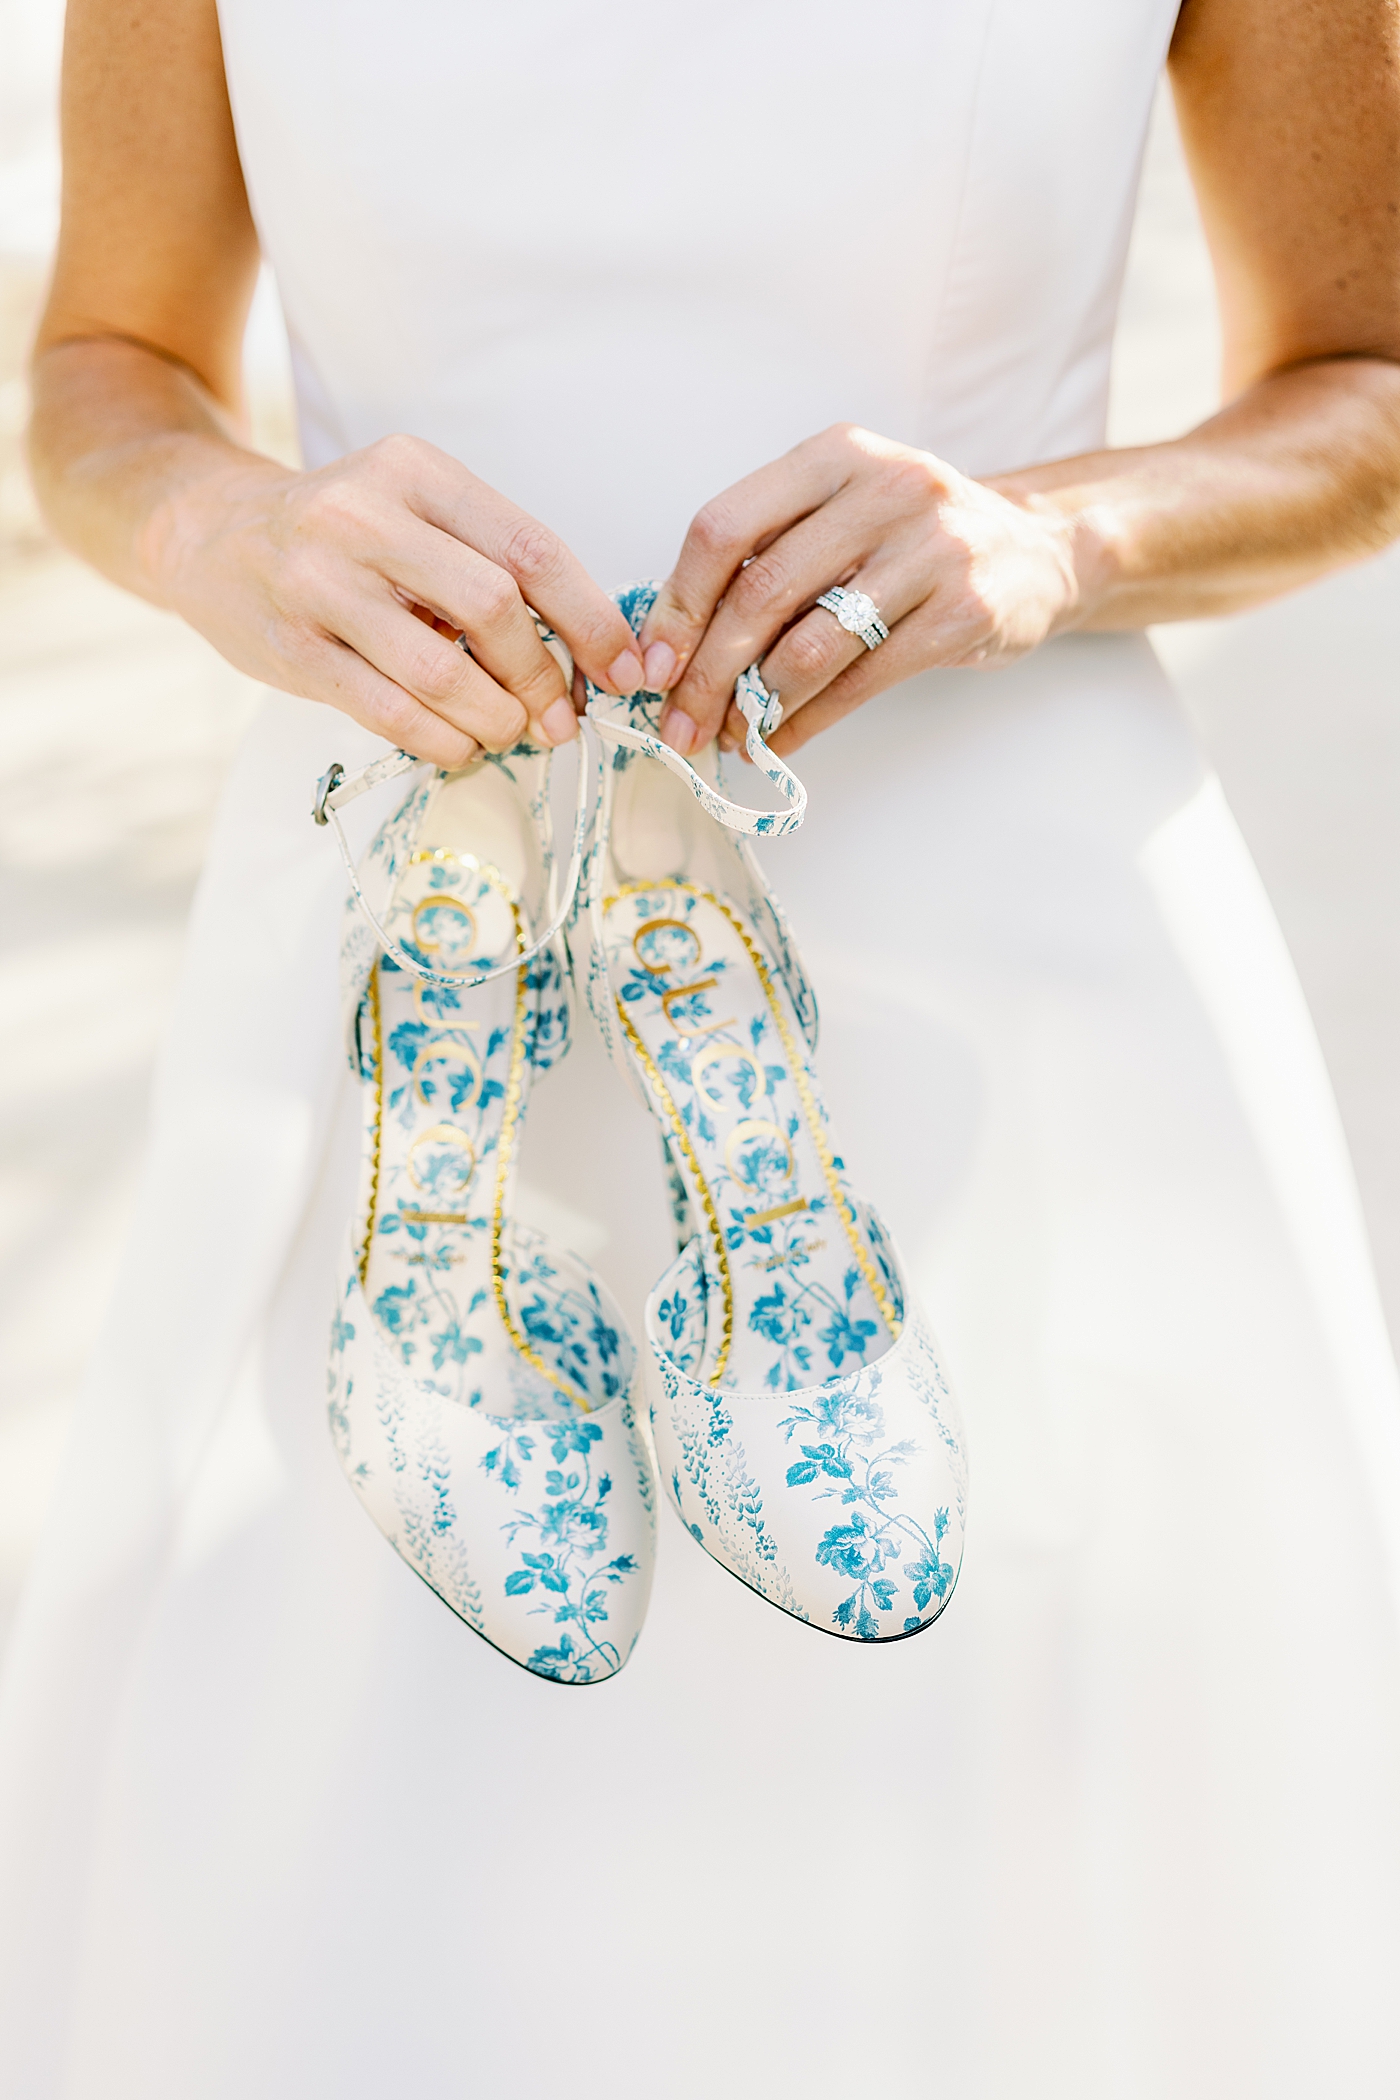 Bride holding blue floral print Gucci shoes | Photo by Annie Laura Photo